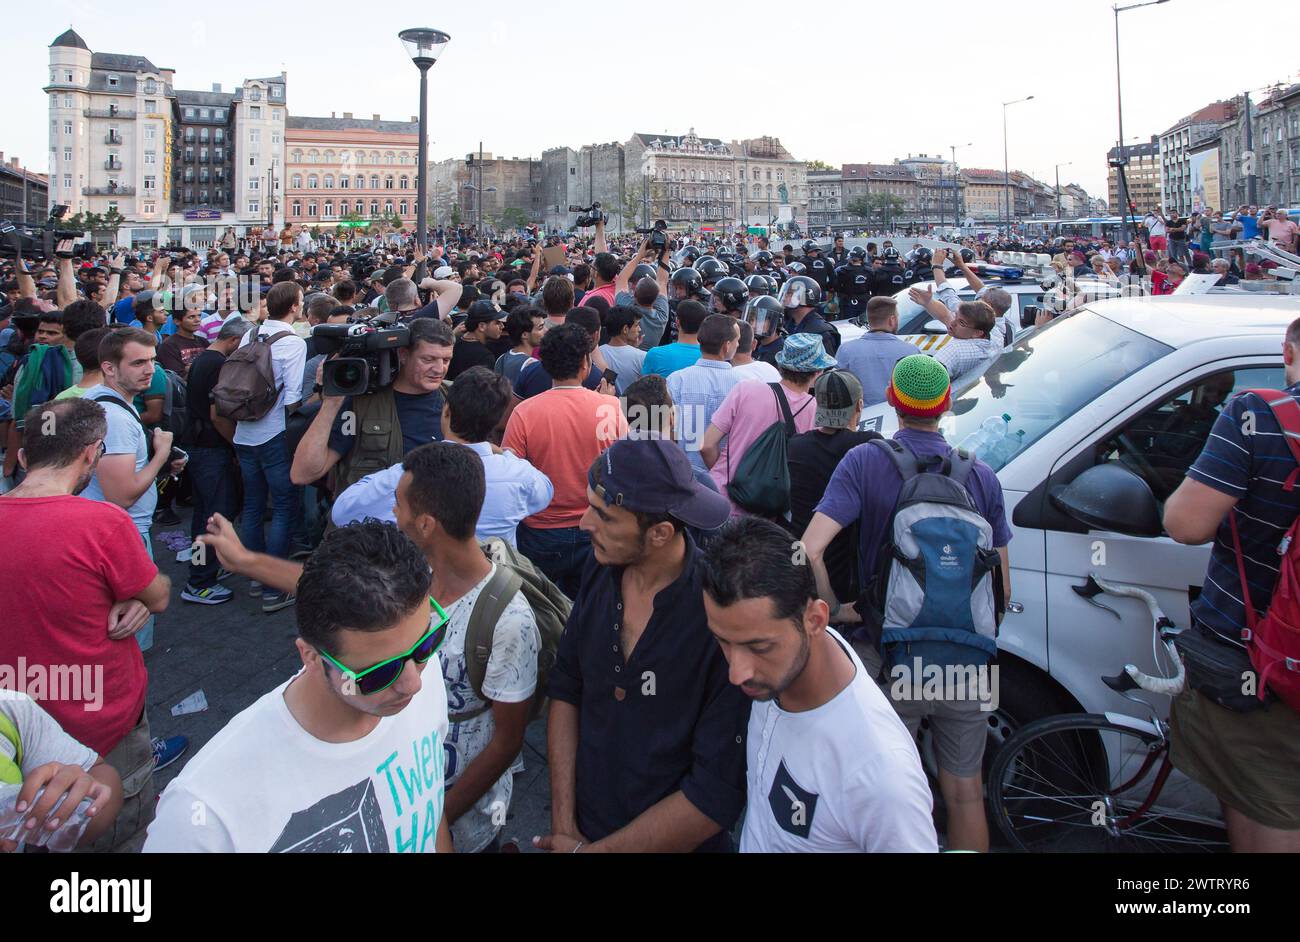 Syrian and other Arab Refugees crowd wait for their onward journey to Western Europe at Hungary, Budapest's Keleti railway station, on 09/02/2015. Stock Photo